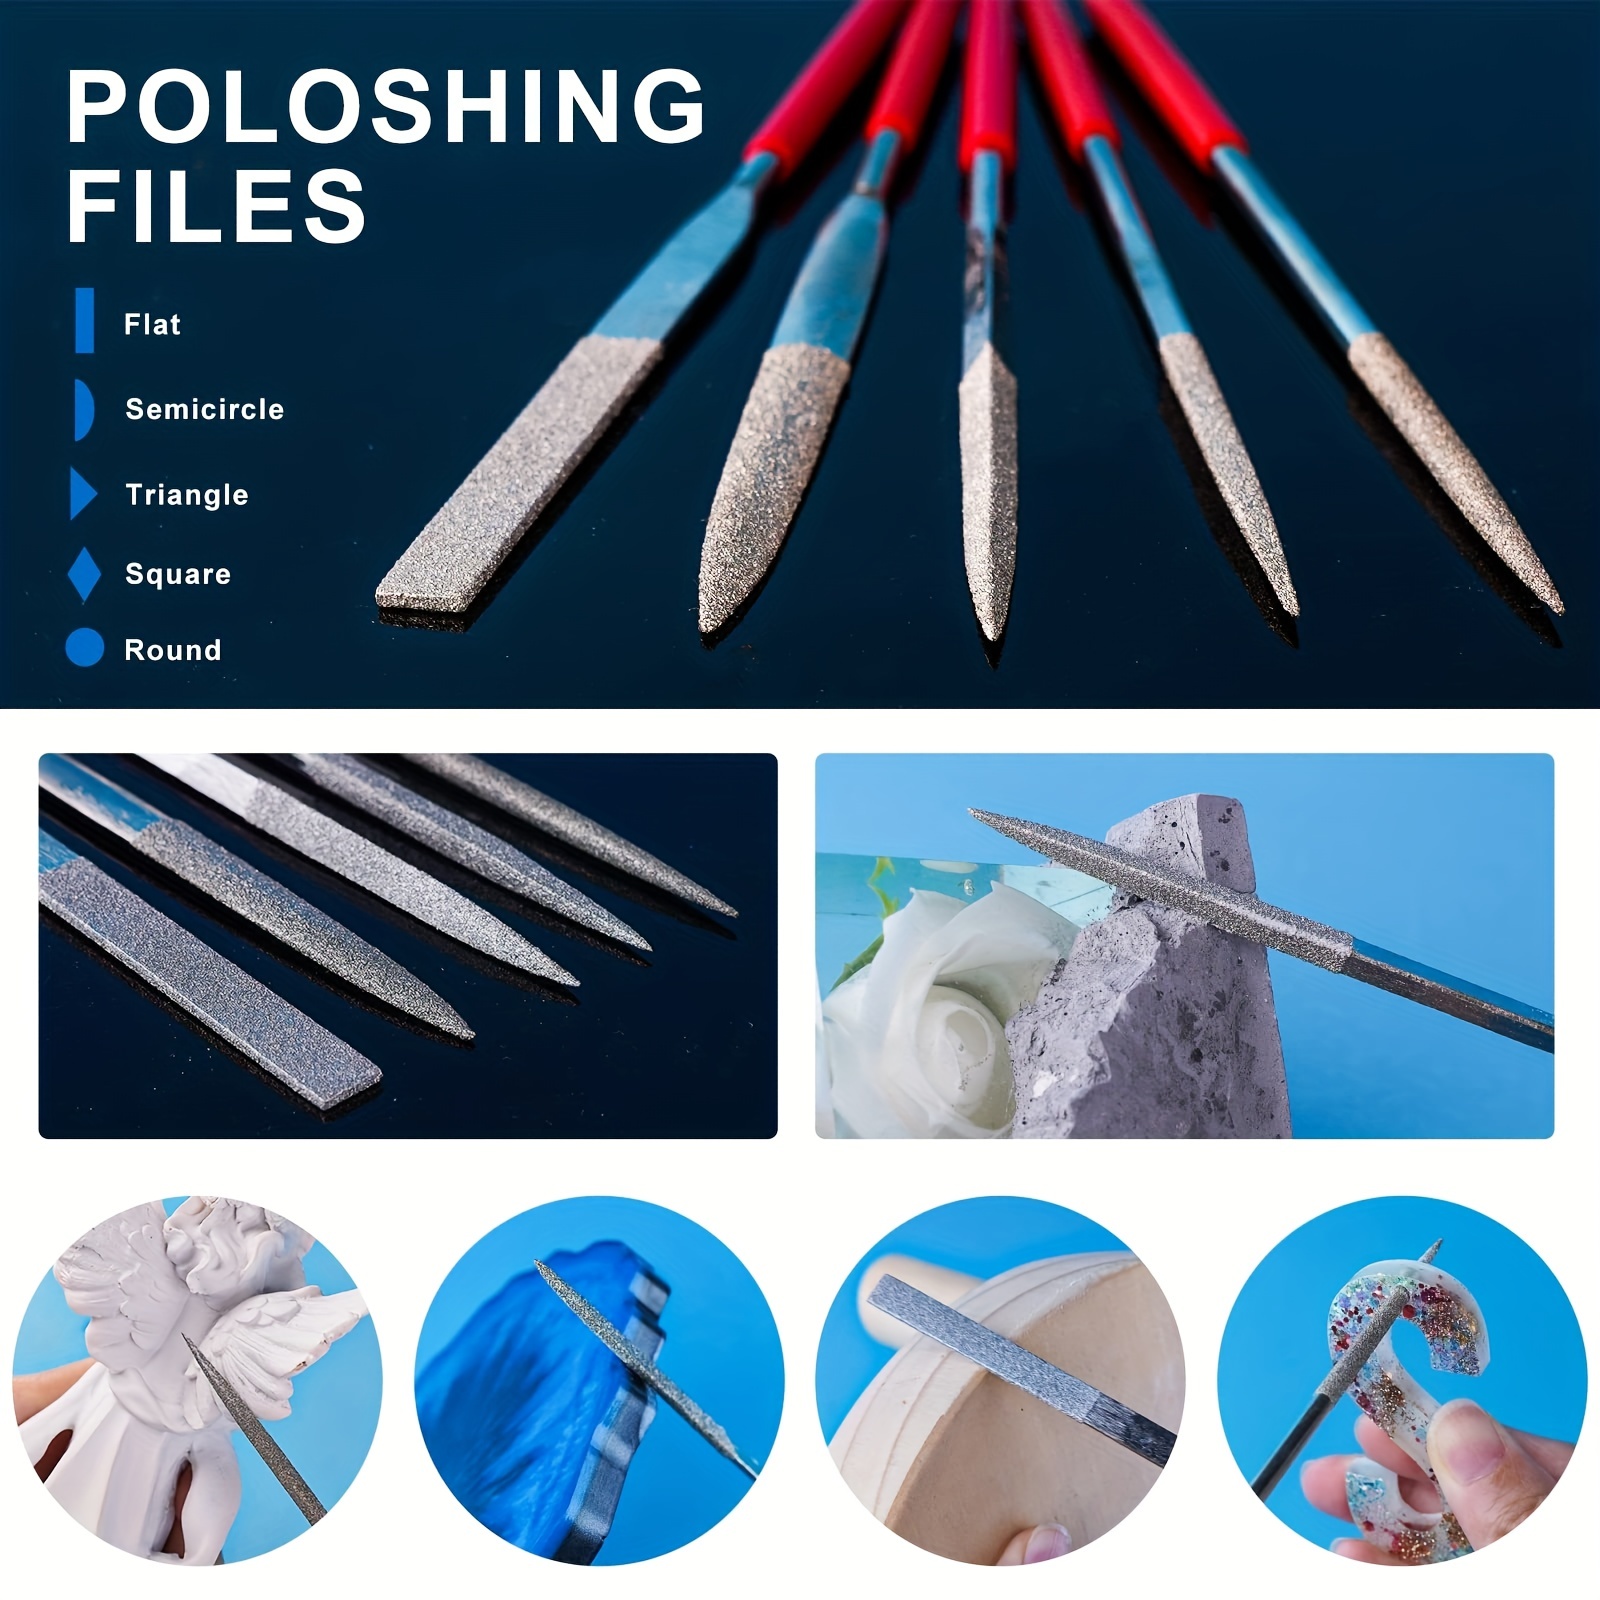 Allazone 19 PCS Resin Casting Tools Resin Sanding and Polishing Kit Include  10 Style File, Sand Papers, Scissors, Wooden Brush, Polishing Blocks for  Polishing Epoxy Resin Jewelry Making Supplies